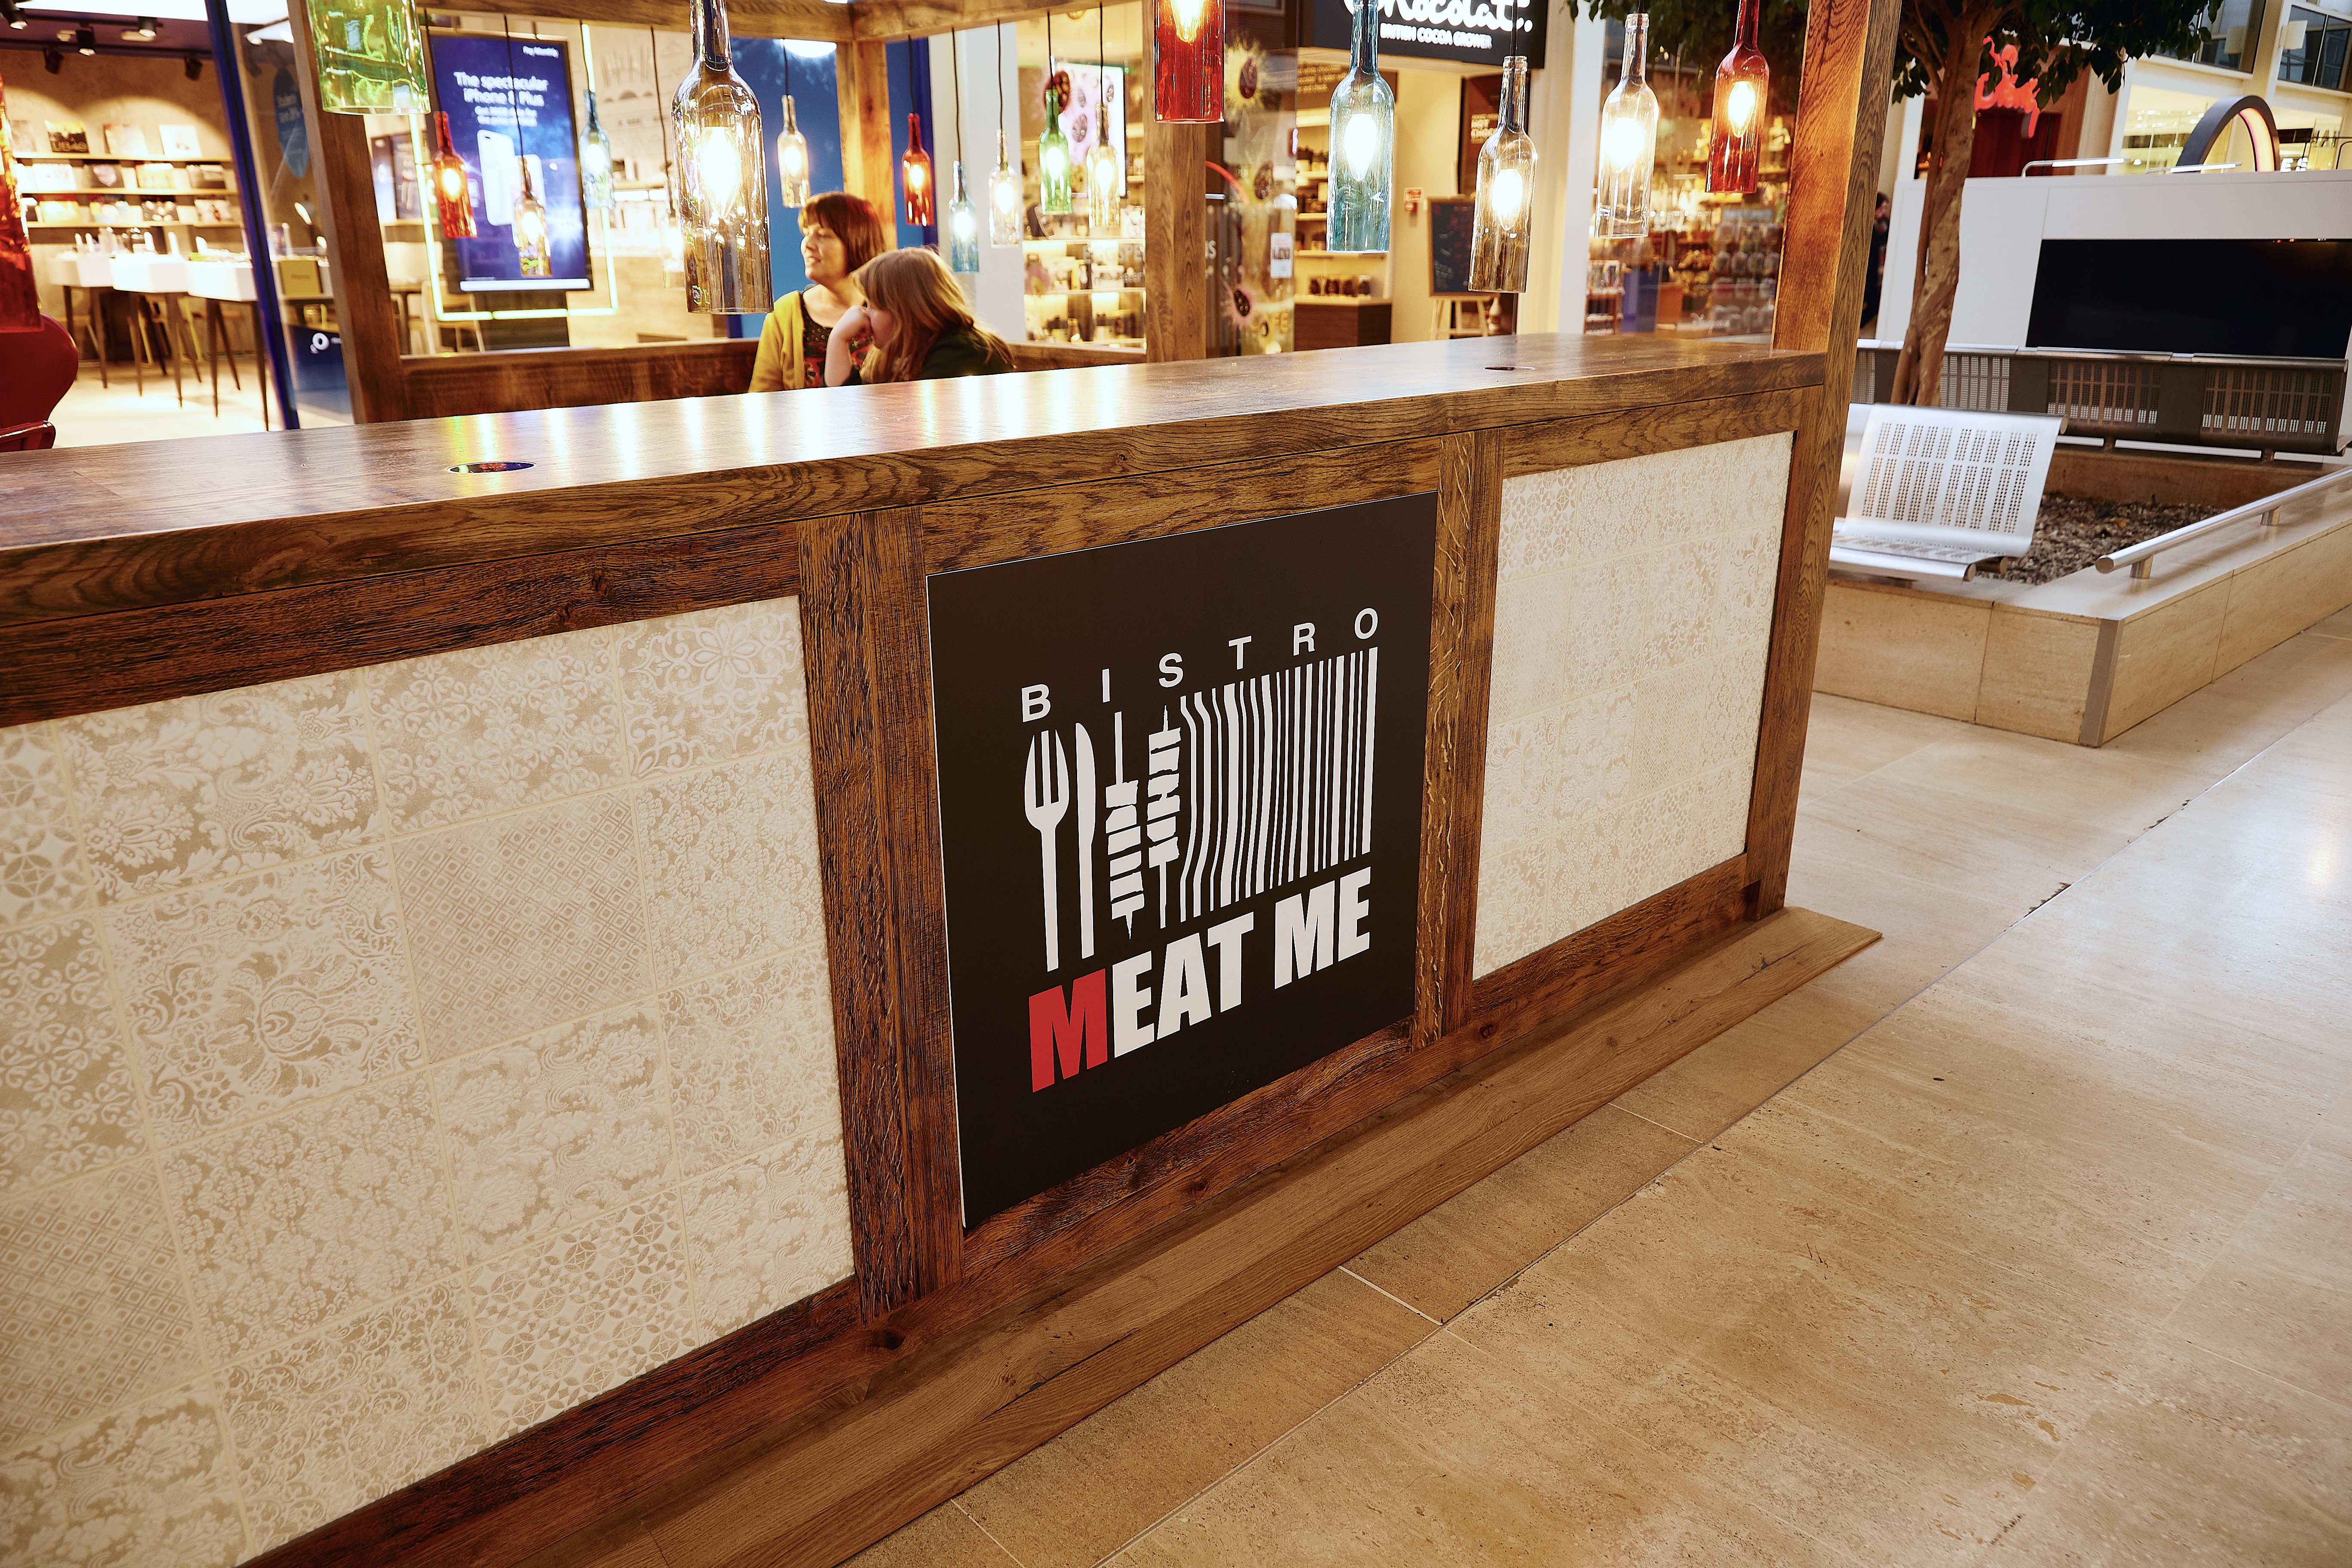 Branding board of Meat Me Bistro with tile and rustic wood surround